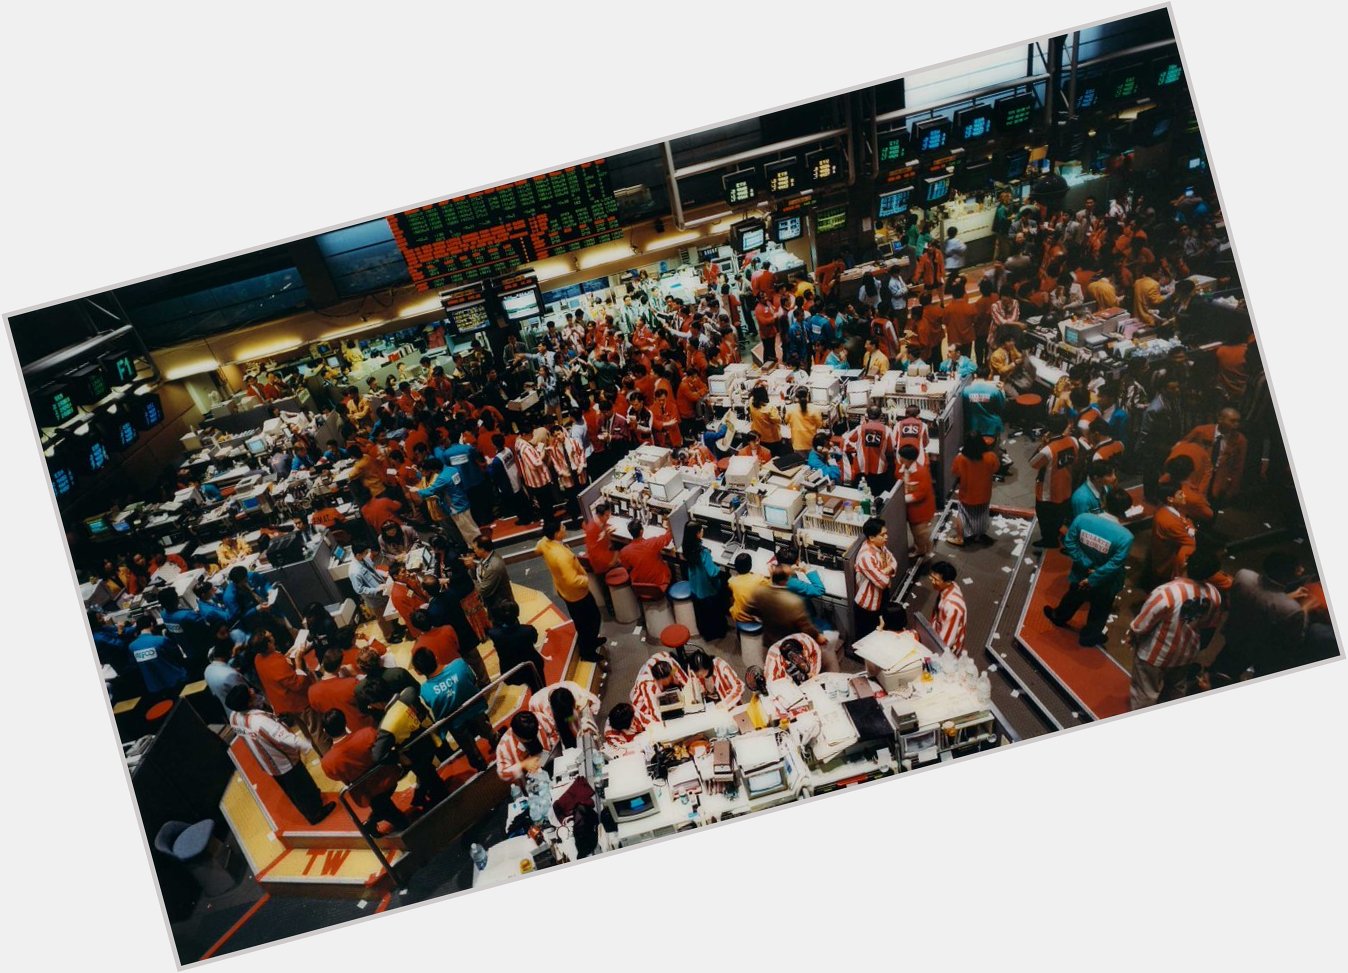 Happy birthday to Andreas Gursky, known for his immersive, large format color photographs:  